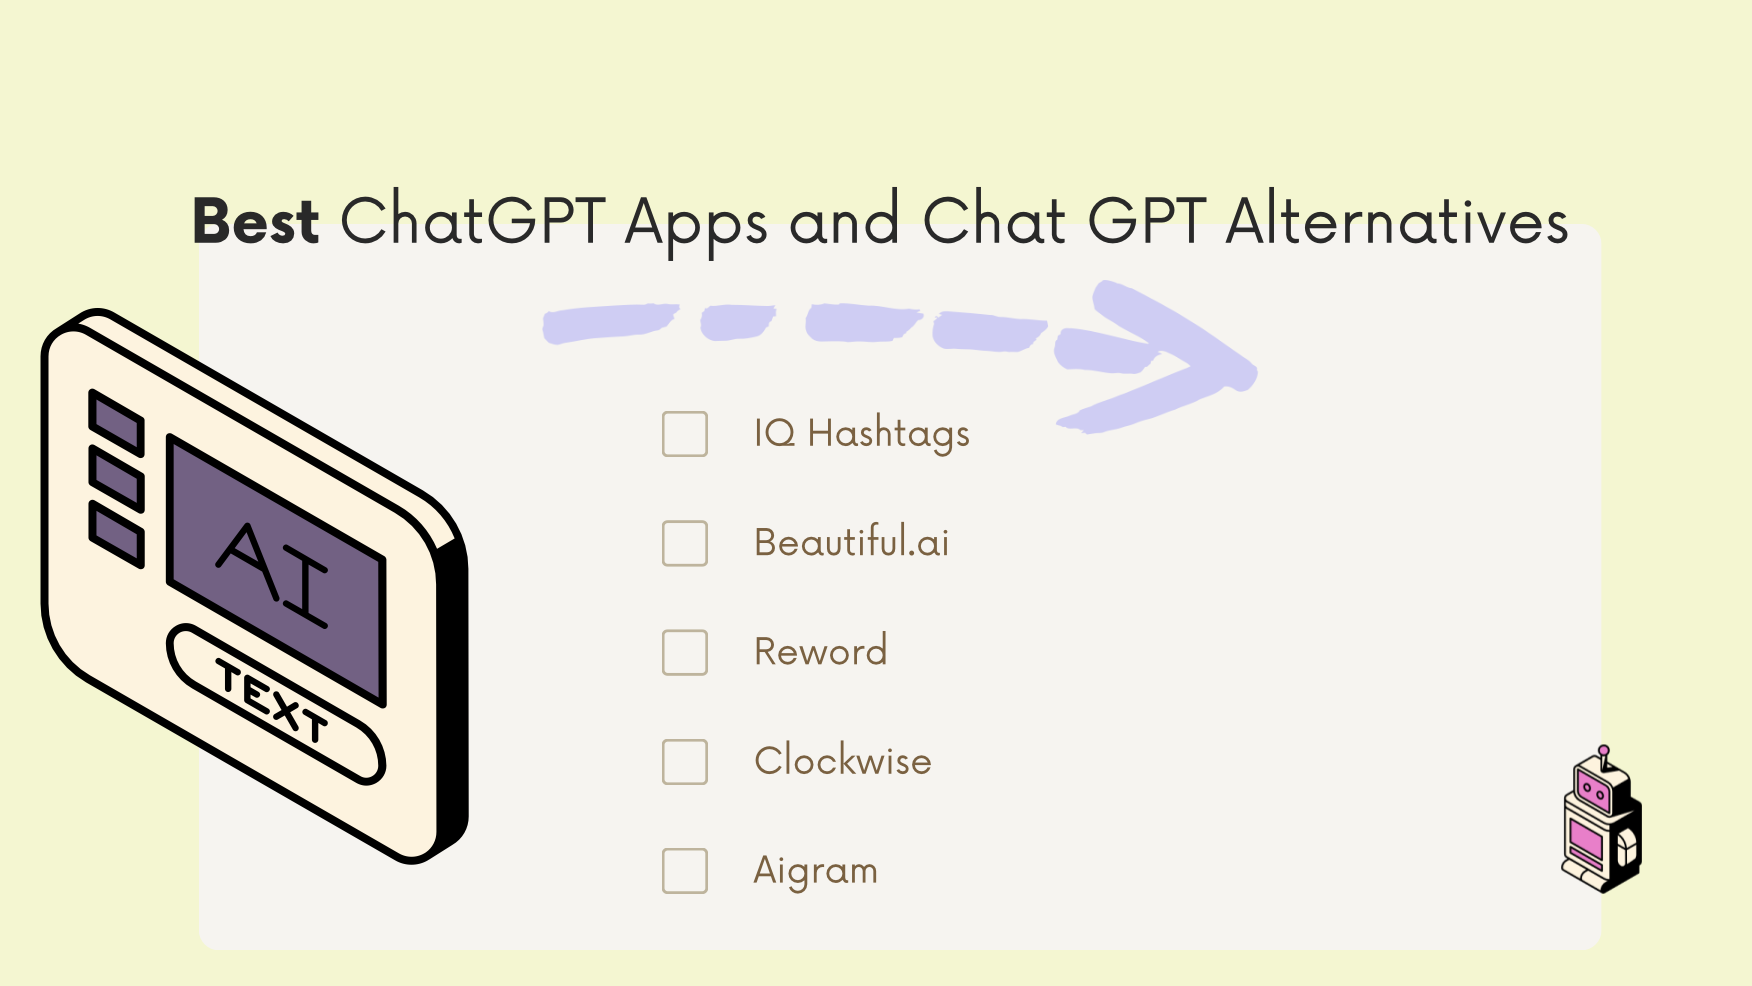 Our List of Best Chat GPT Apps